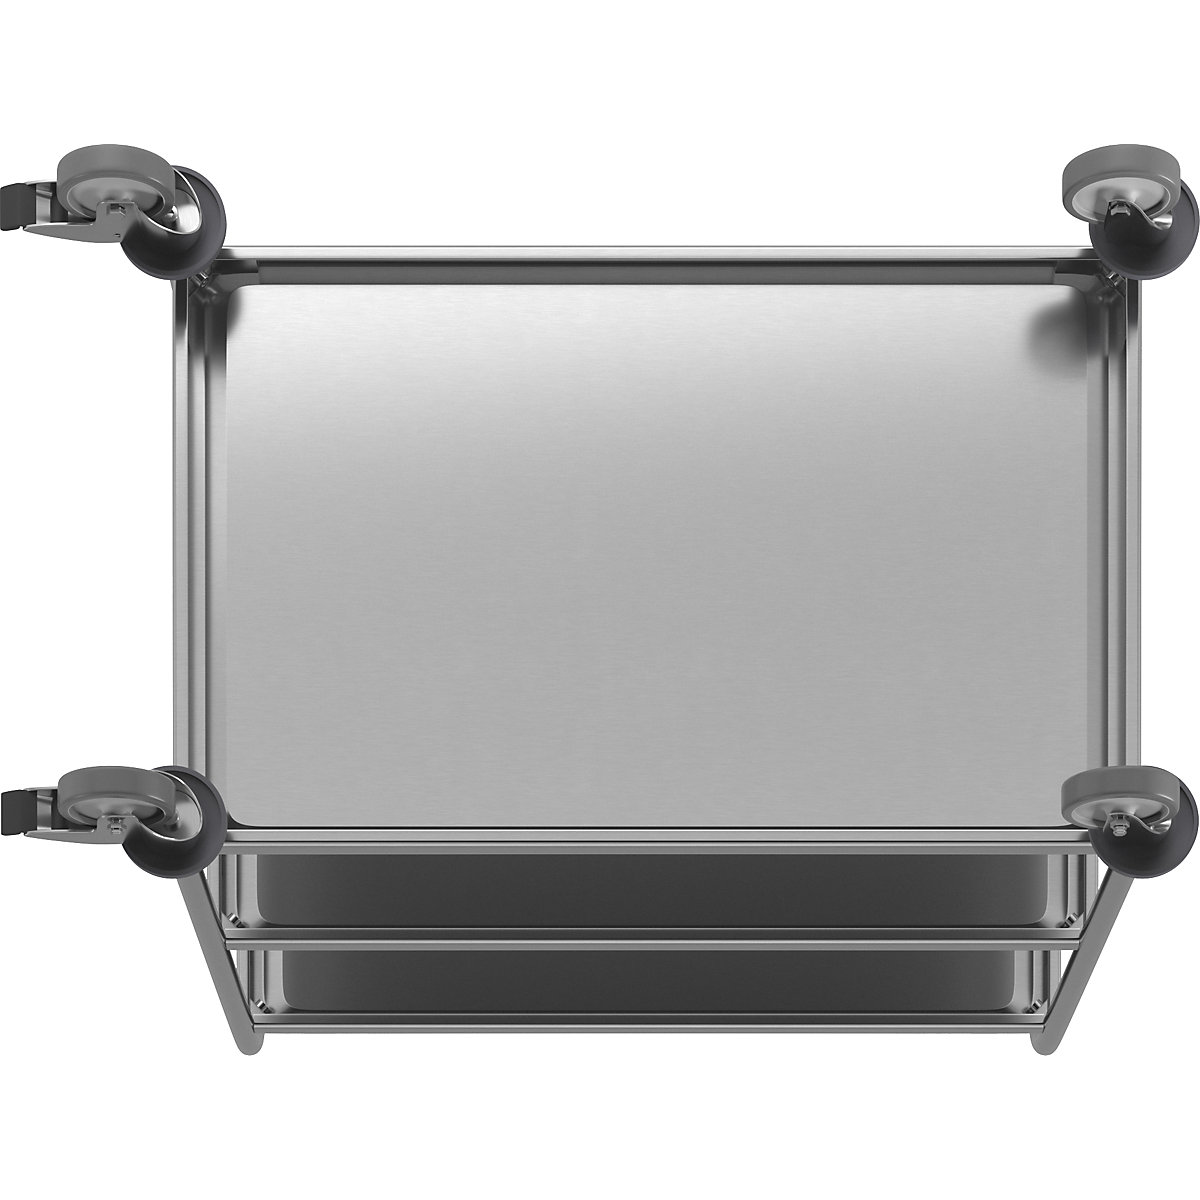 Stainless steel serving trolley – Kongamek (Product illustration 5)-4